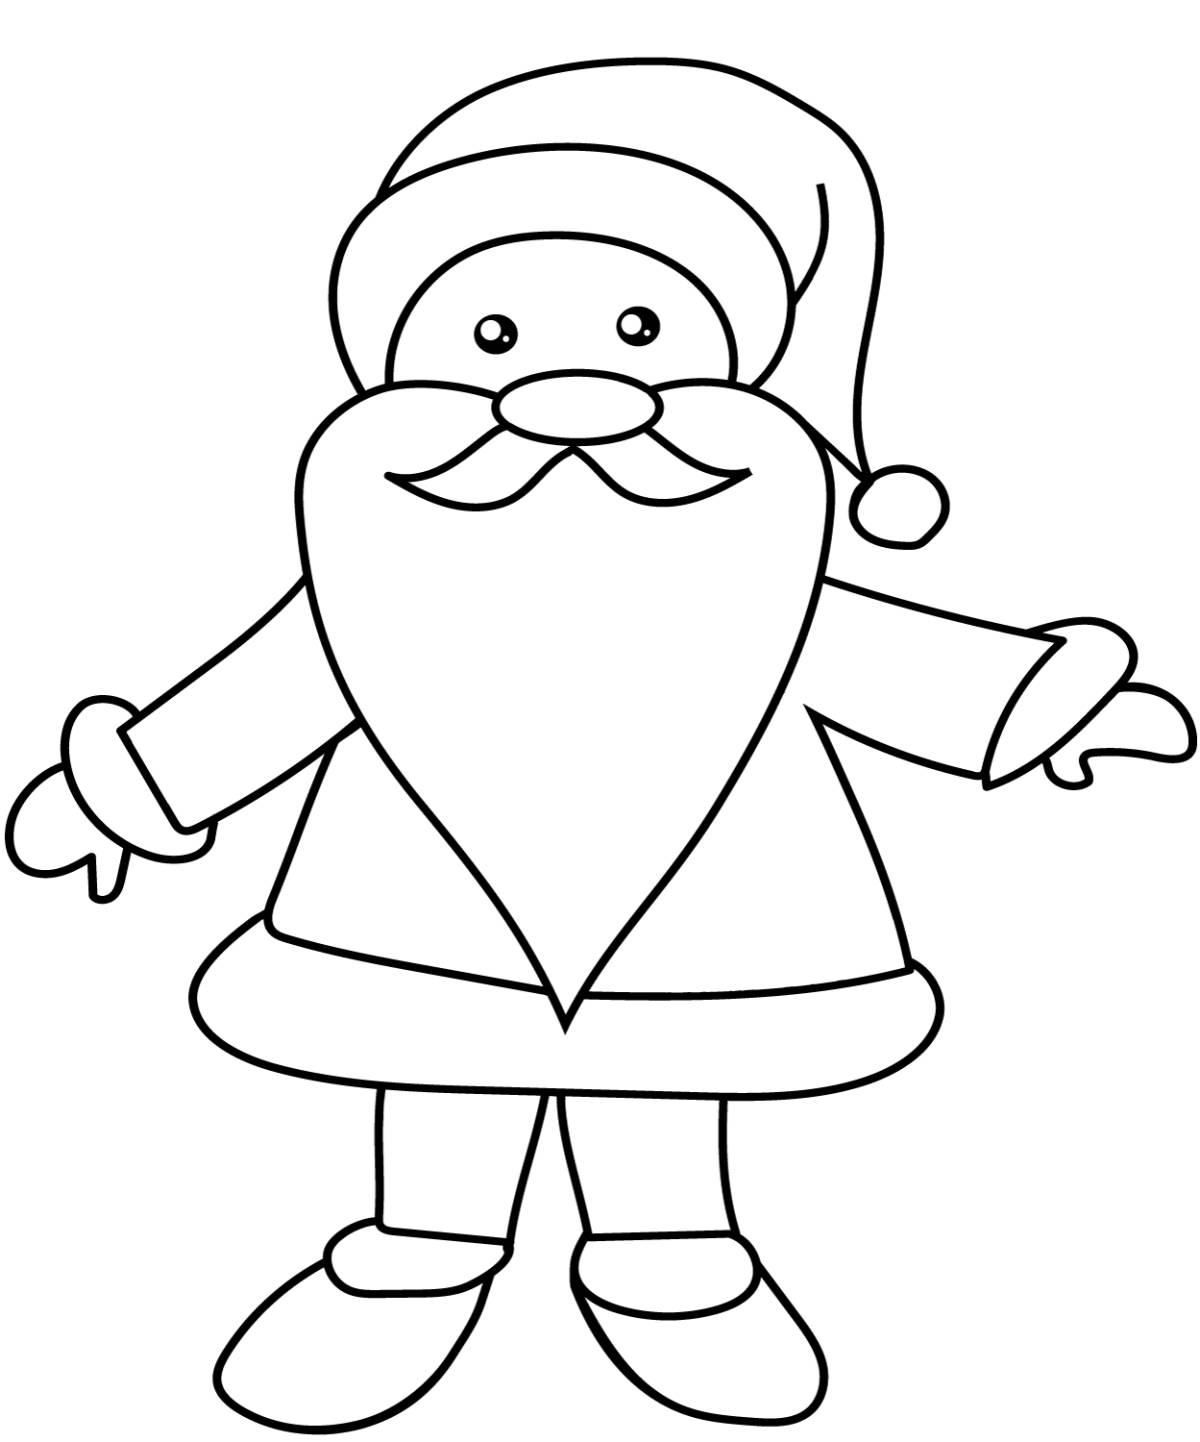 Glitter santa claus coloring book for kids 2-3 years old